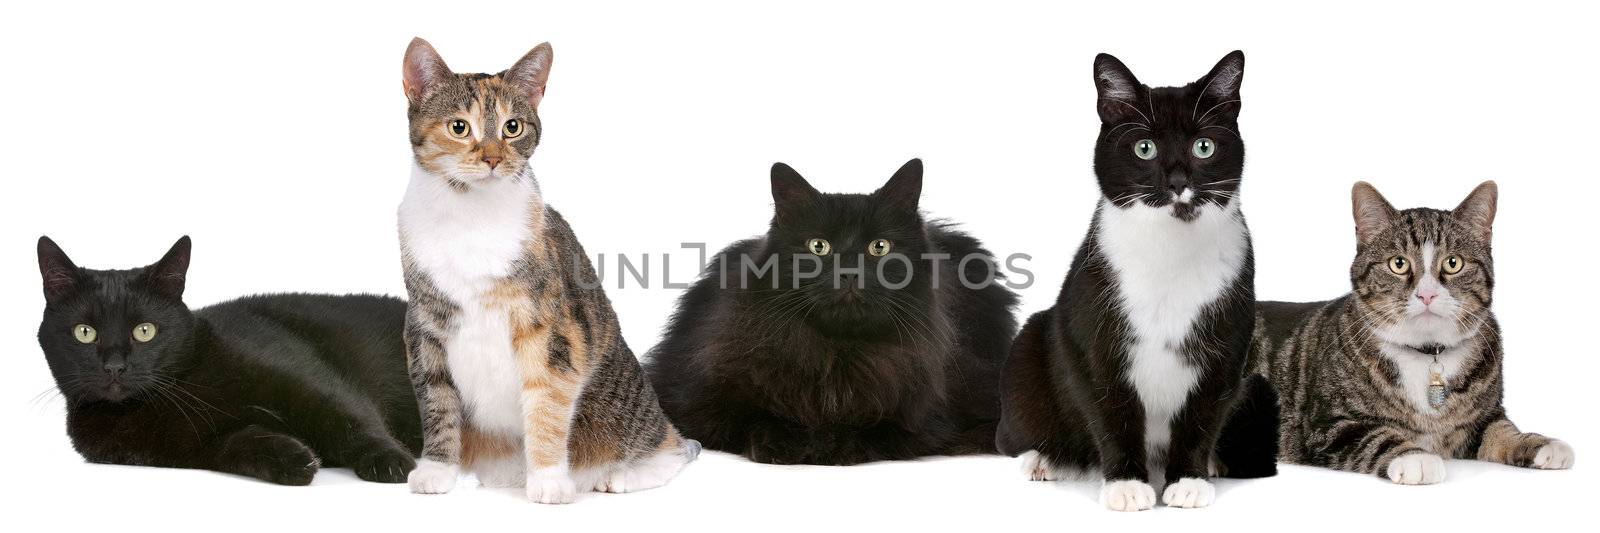 Group of cats in front of a white background